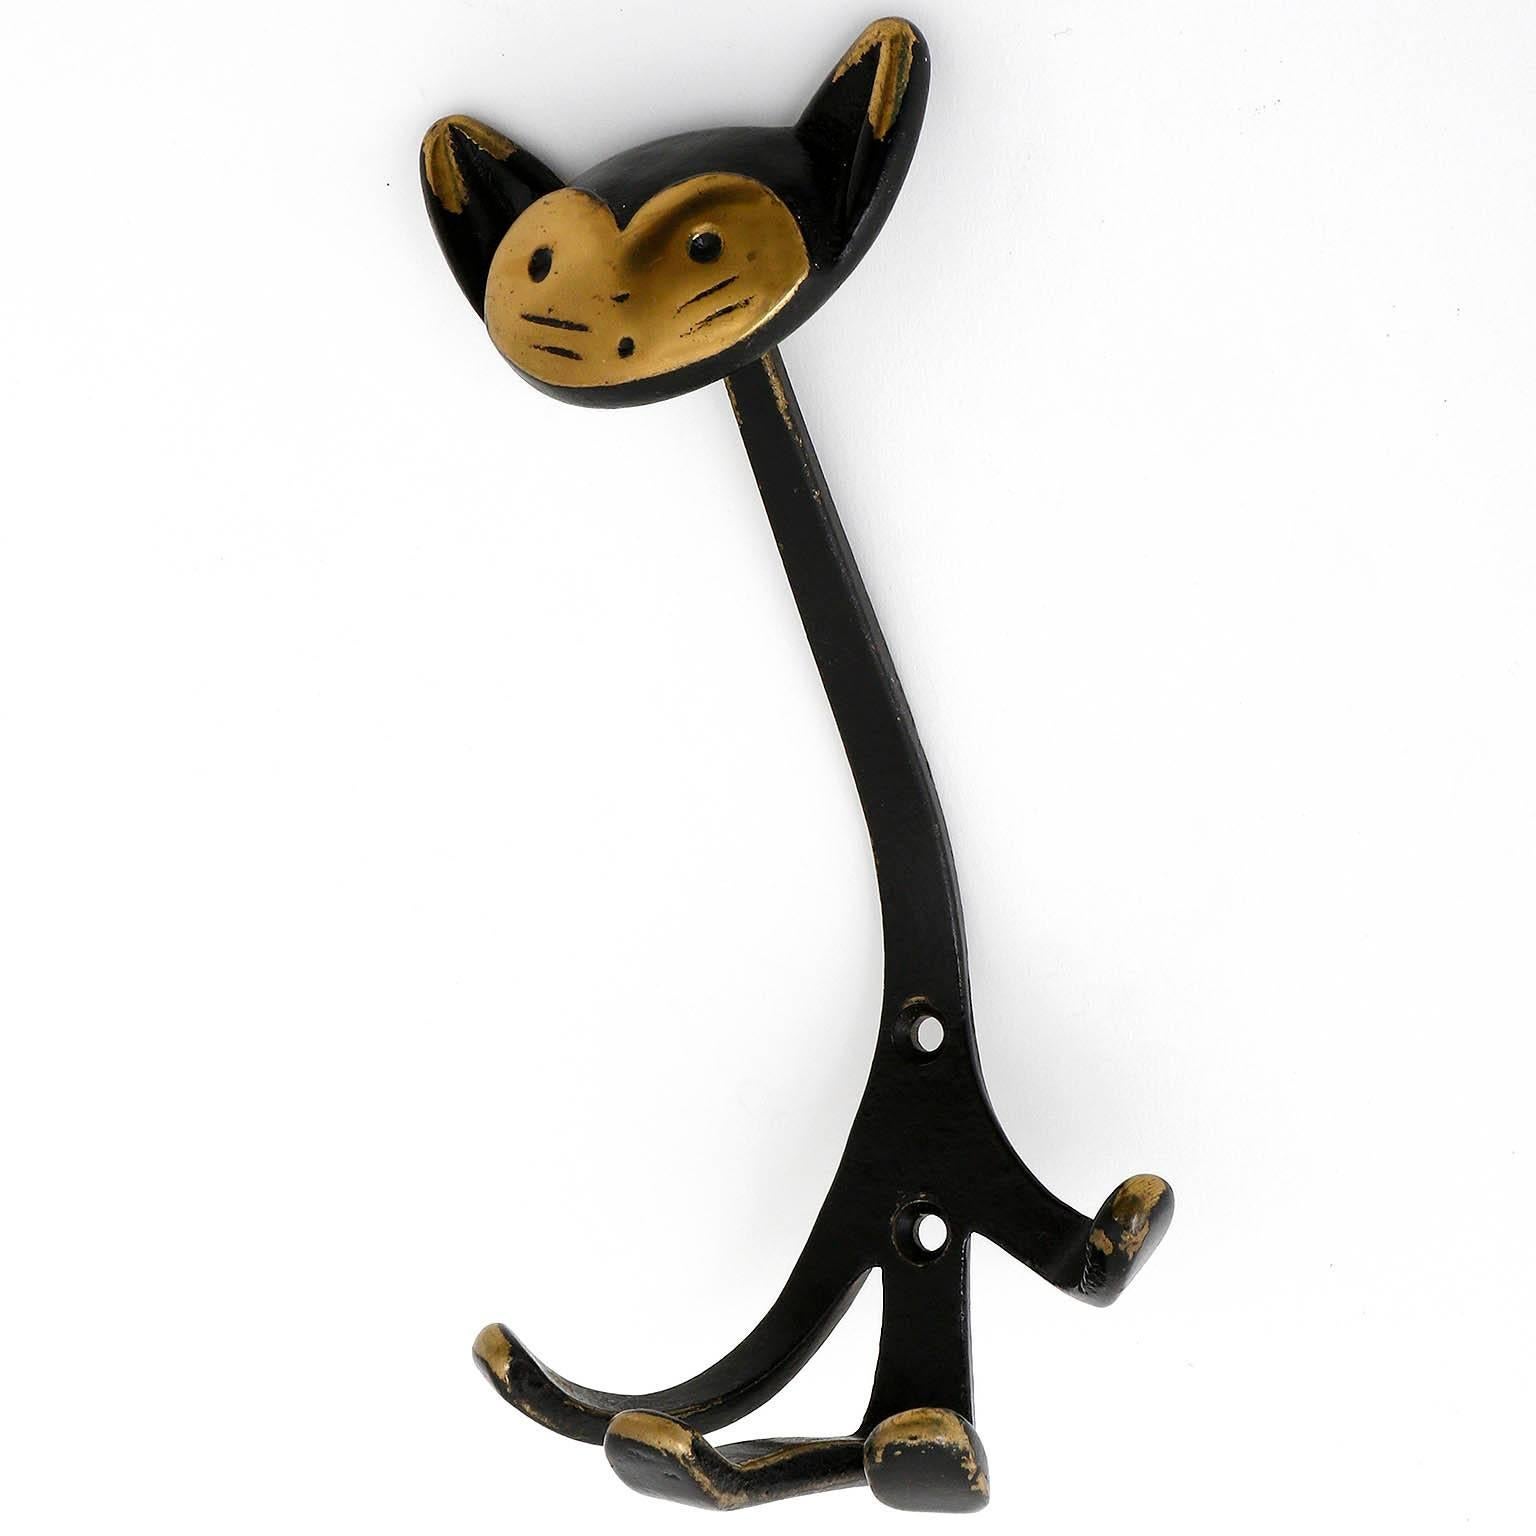 A coat wall hook in the form of a cat by Walter Bosse, Austria, manufactured in Mid-Century, circa 1950.
It is made of blackened and partly polished brass. Wear of use, lovely patina.

There are also other animal hooks in the form of a monkey, a